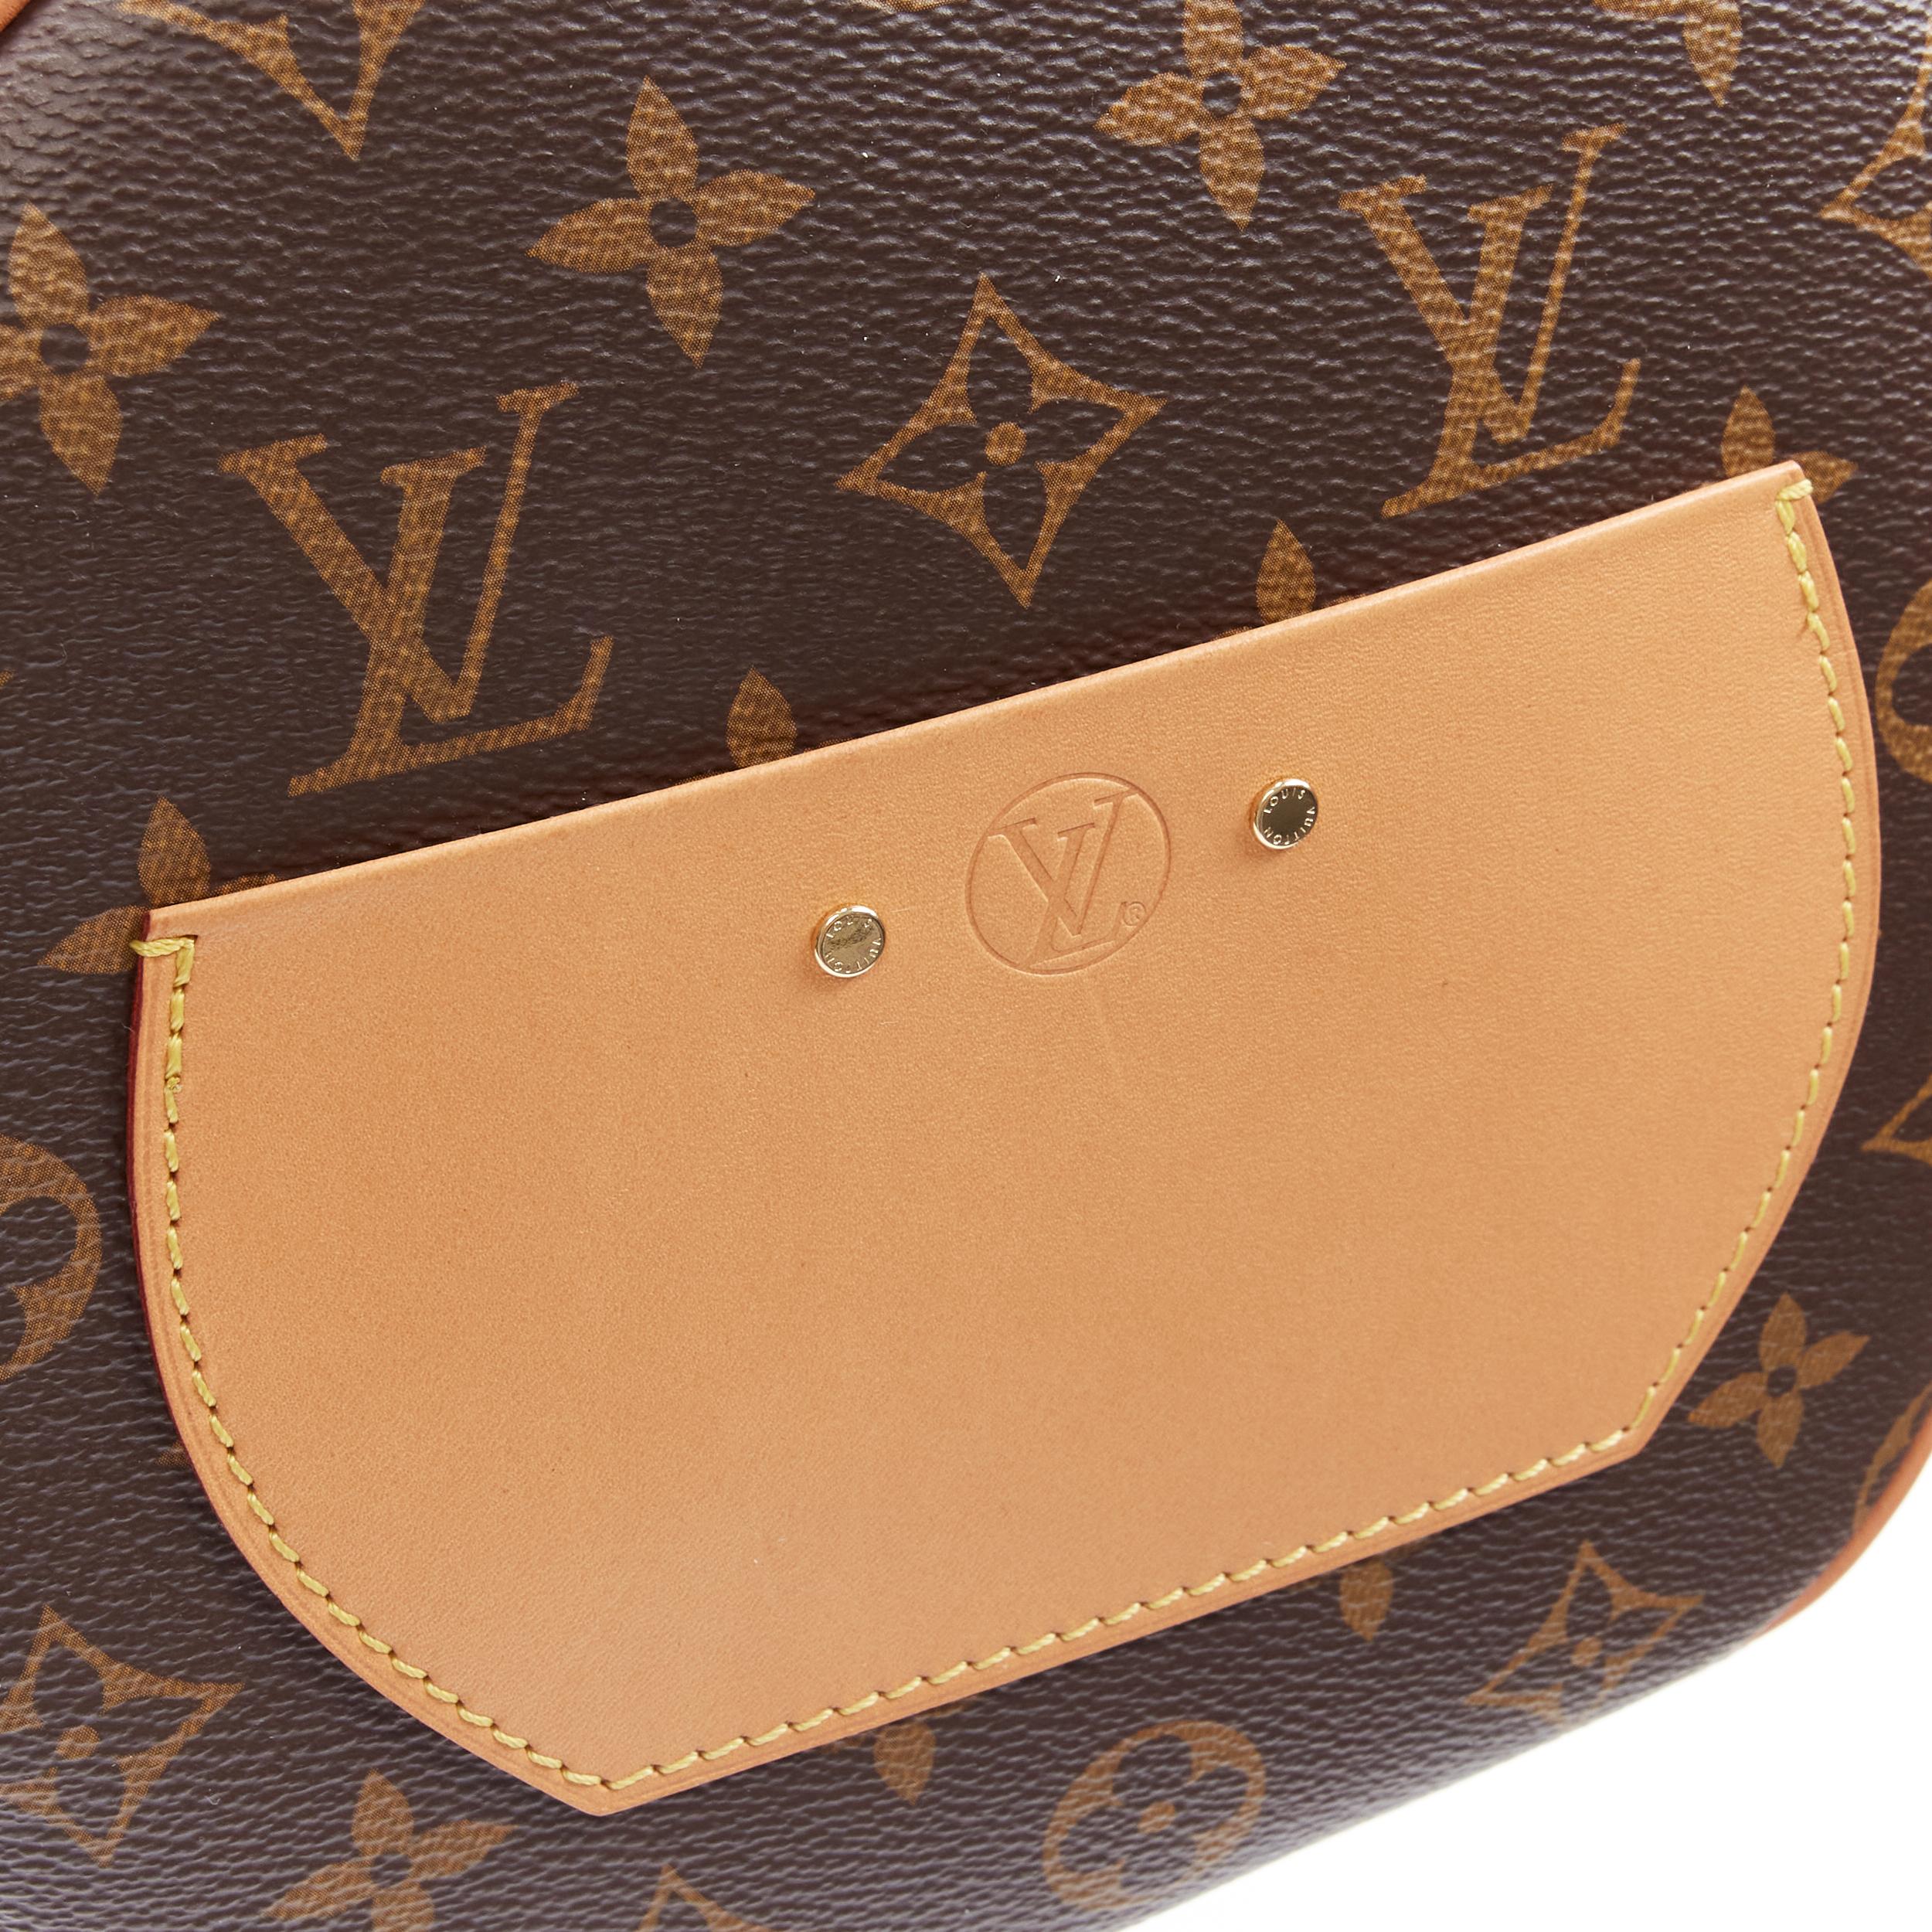 LOUIS VUITTON 2018 Boite Chapeau MM brown coated canvas rounded top crossbody  1